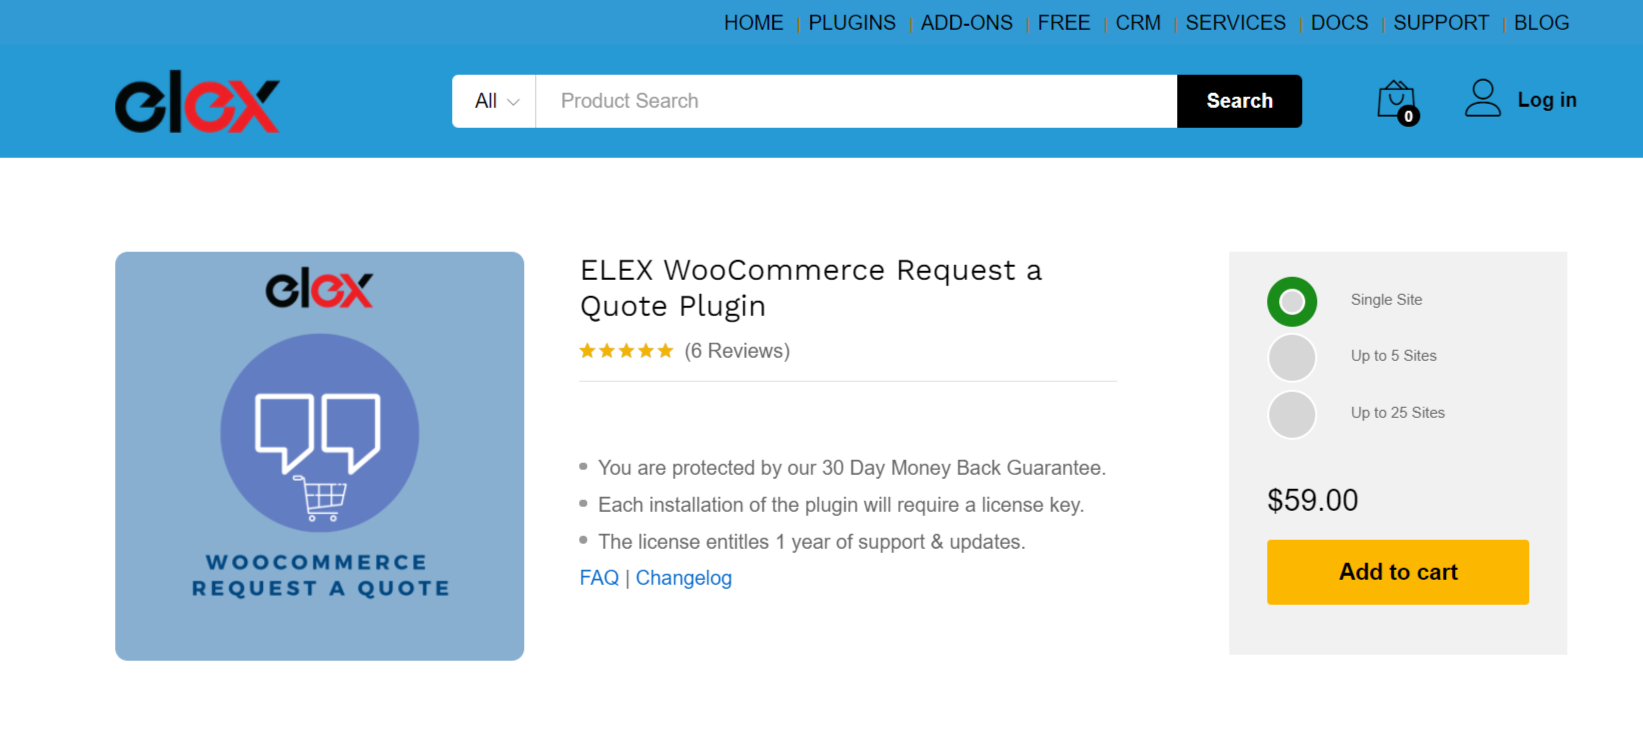 The ELEX WooCommerce Request a Quote plugin product page with the Add to cart button and the $59 price of the plugin